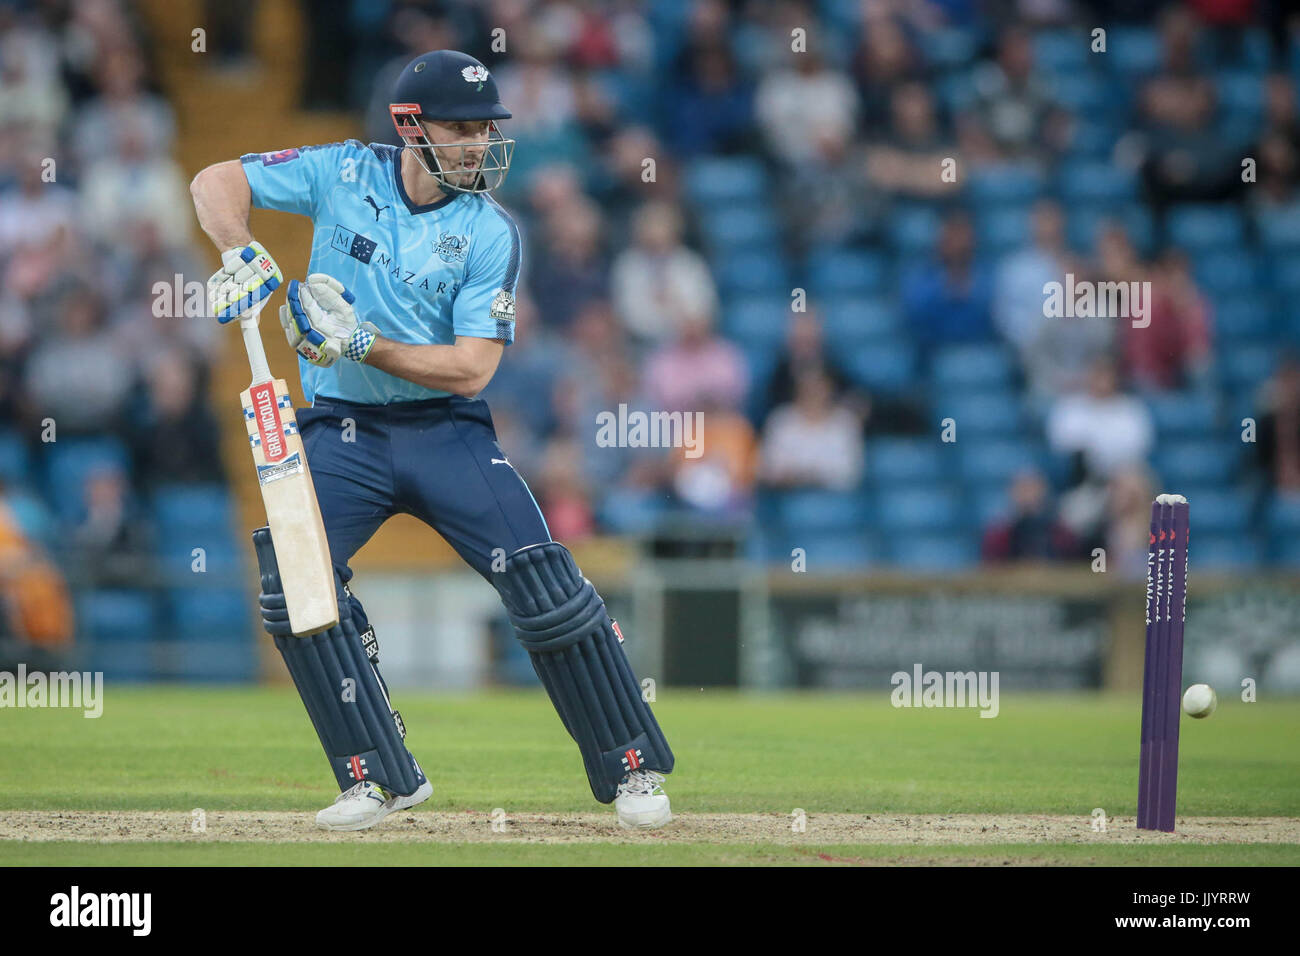 Shaun Marsh watches as his hit goes towards the boundary during the Natwest T20 Blast game between Yorkshire County Cricket Club v Warwickshire County Cricket Club on Friday 21 July 2017. Photo by Mark P Doherty. Stock Photo